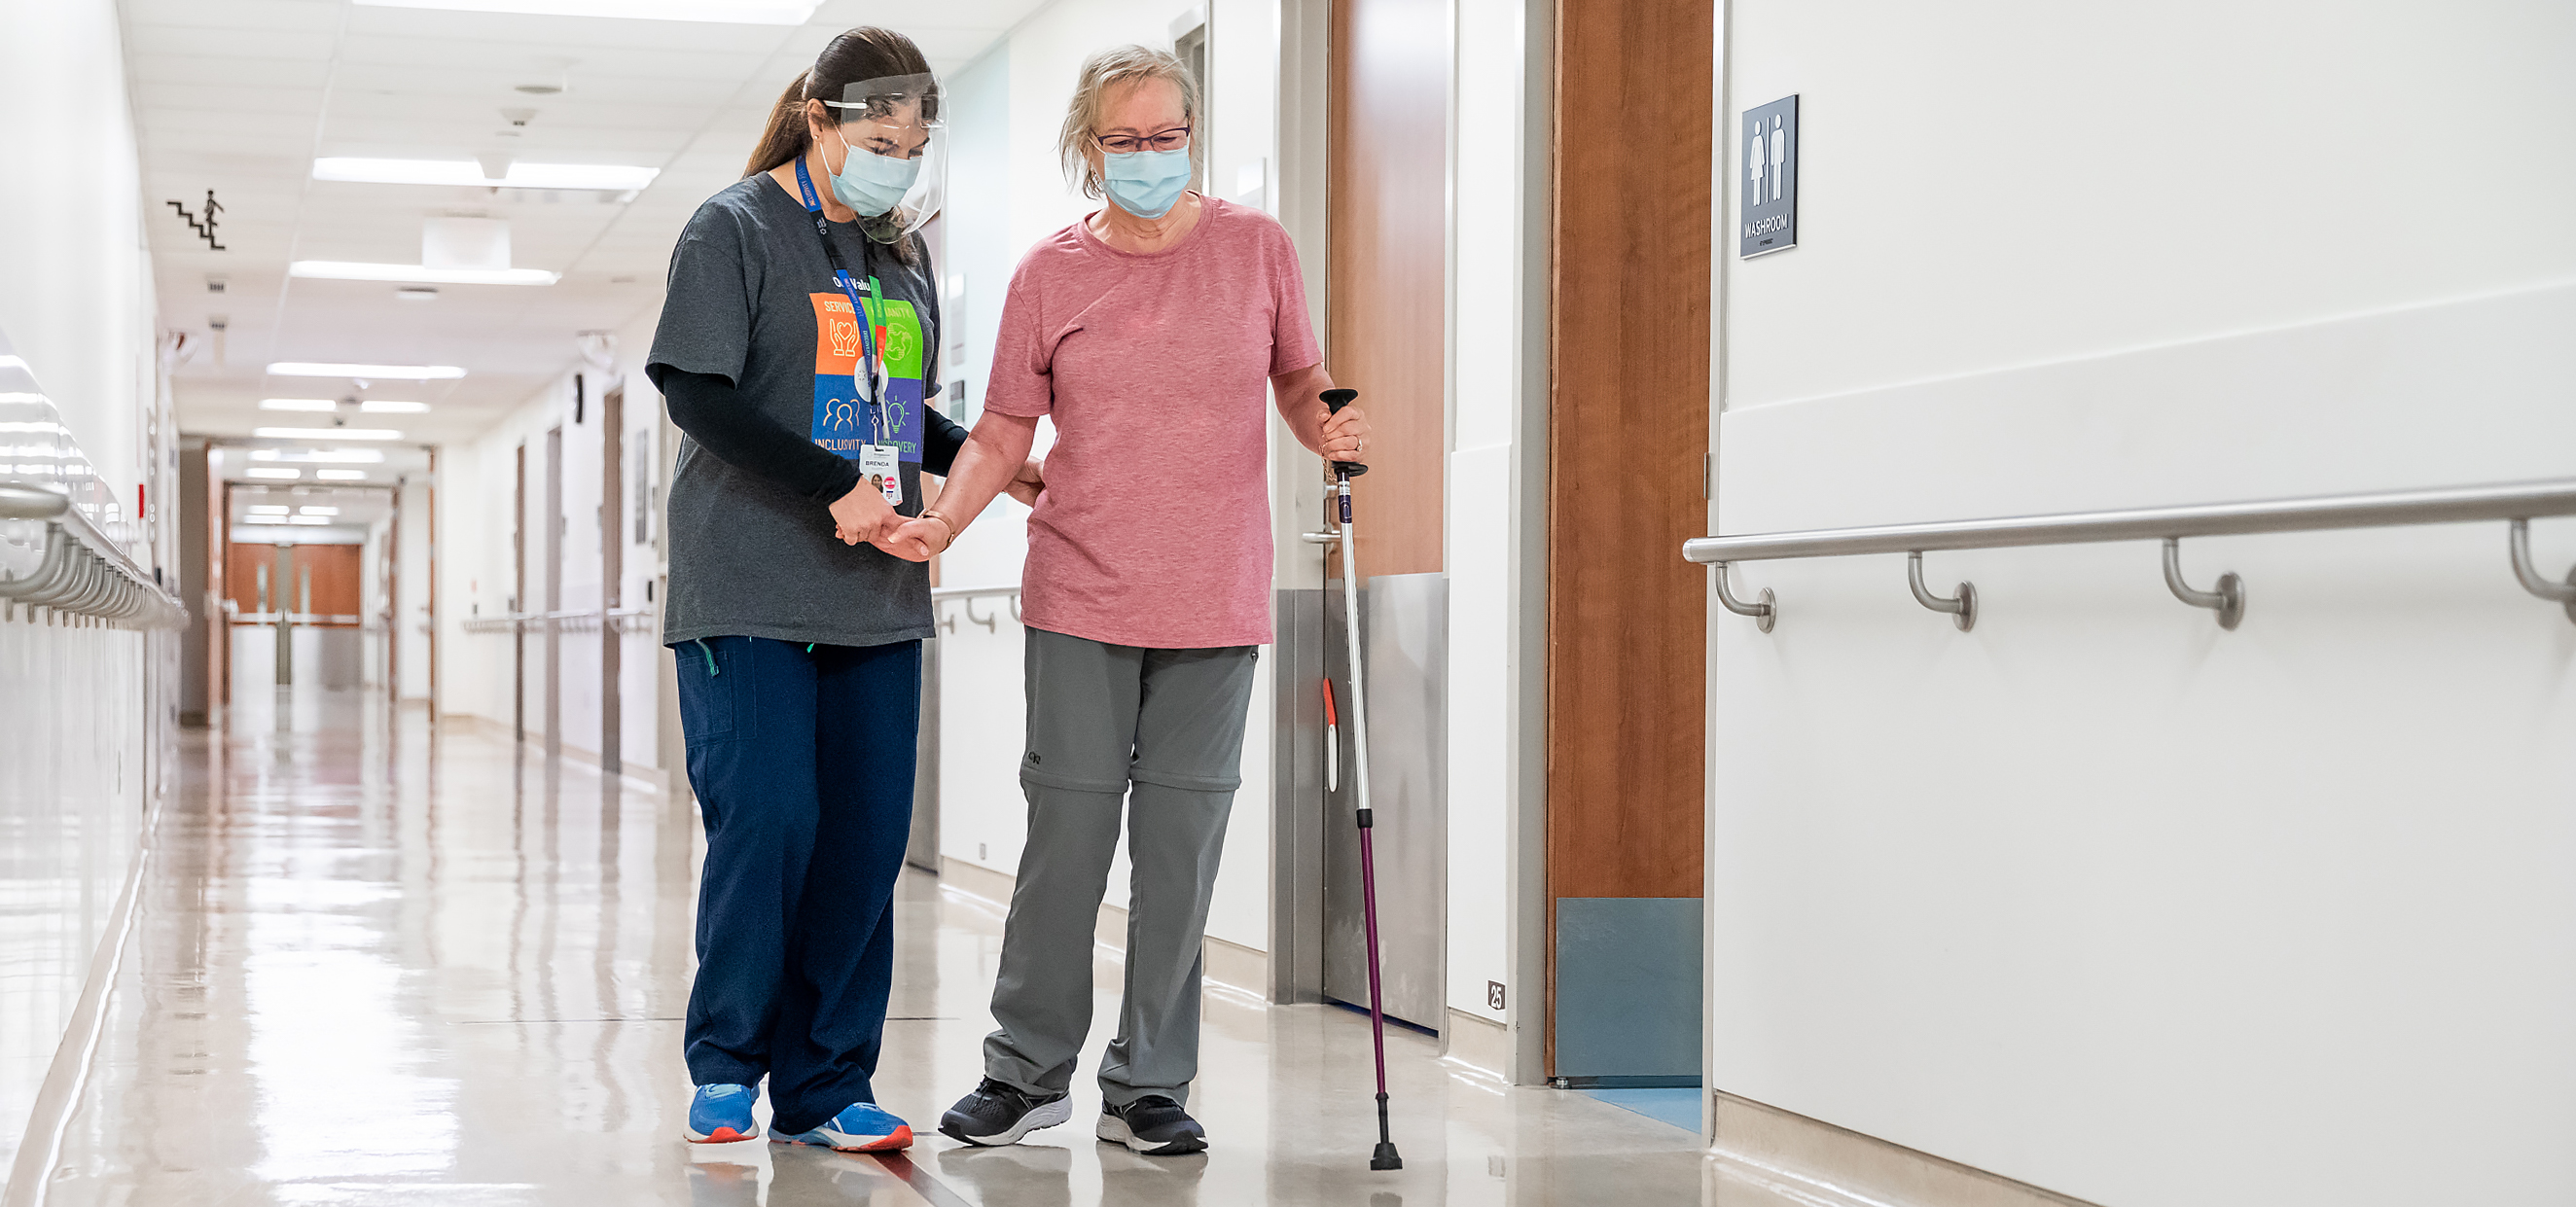 A health-care provider and a patient are walking down the hallway of a hospital. The patient is an older adult woman and she is walking towards the camera with a walking pole in her left hand. The health care provider walks on the patient's right side, holding her hand and offering support